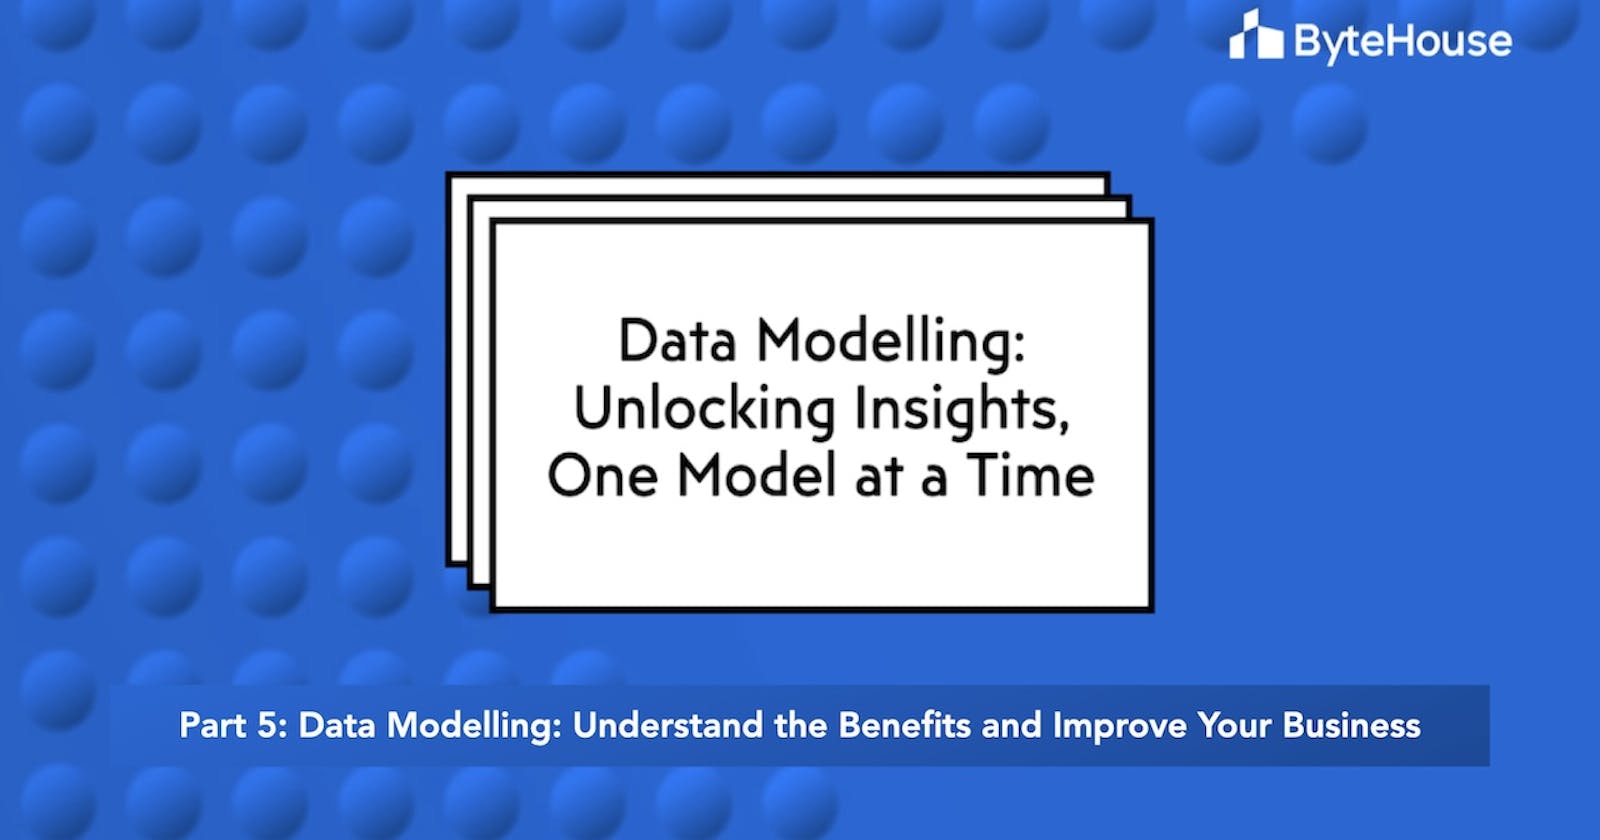 Data modelling: Understand the benefits and improve your business